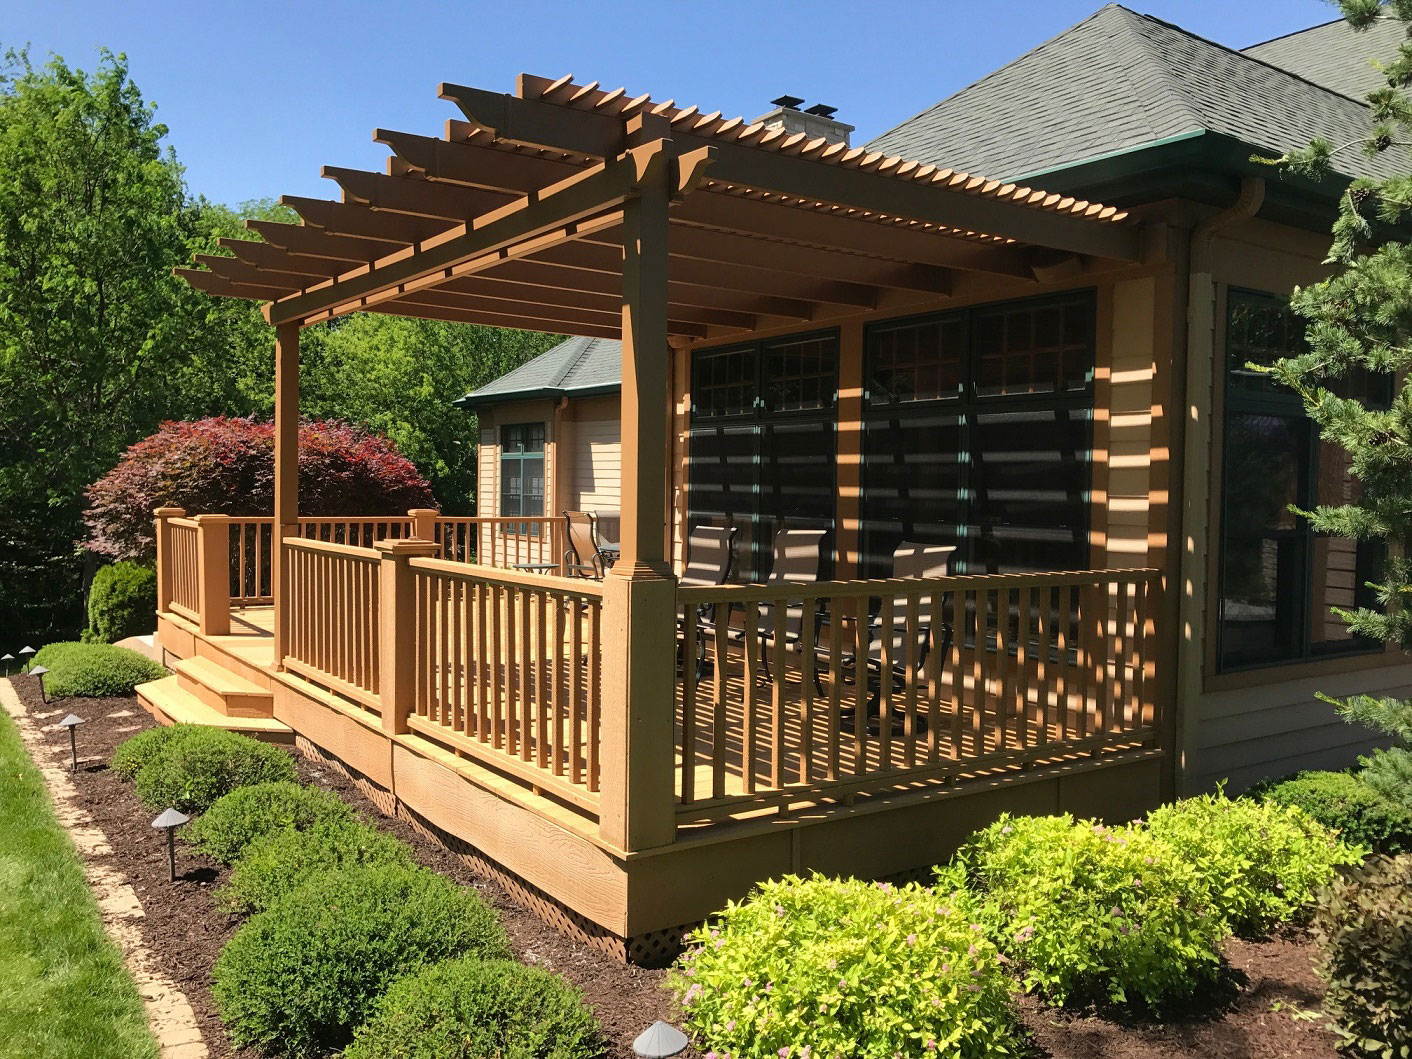 Pergola that has been painted brown on a deck